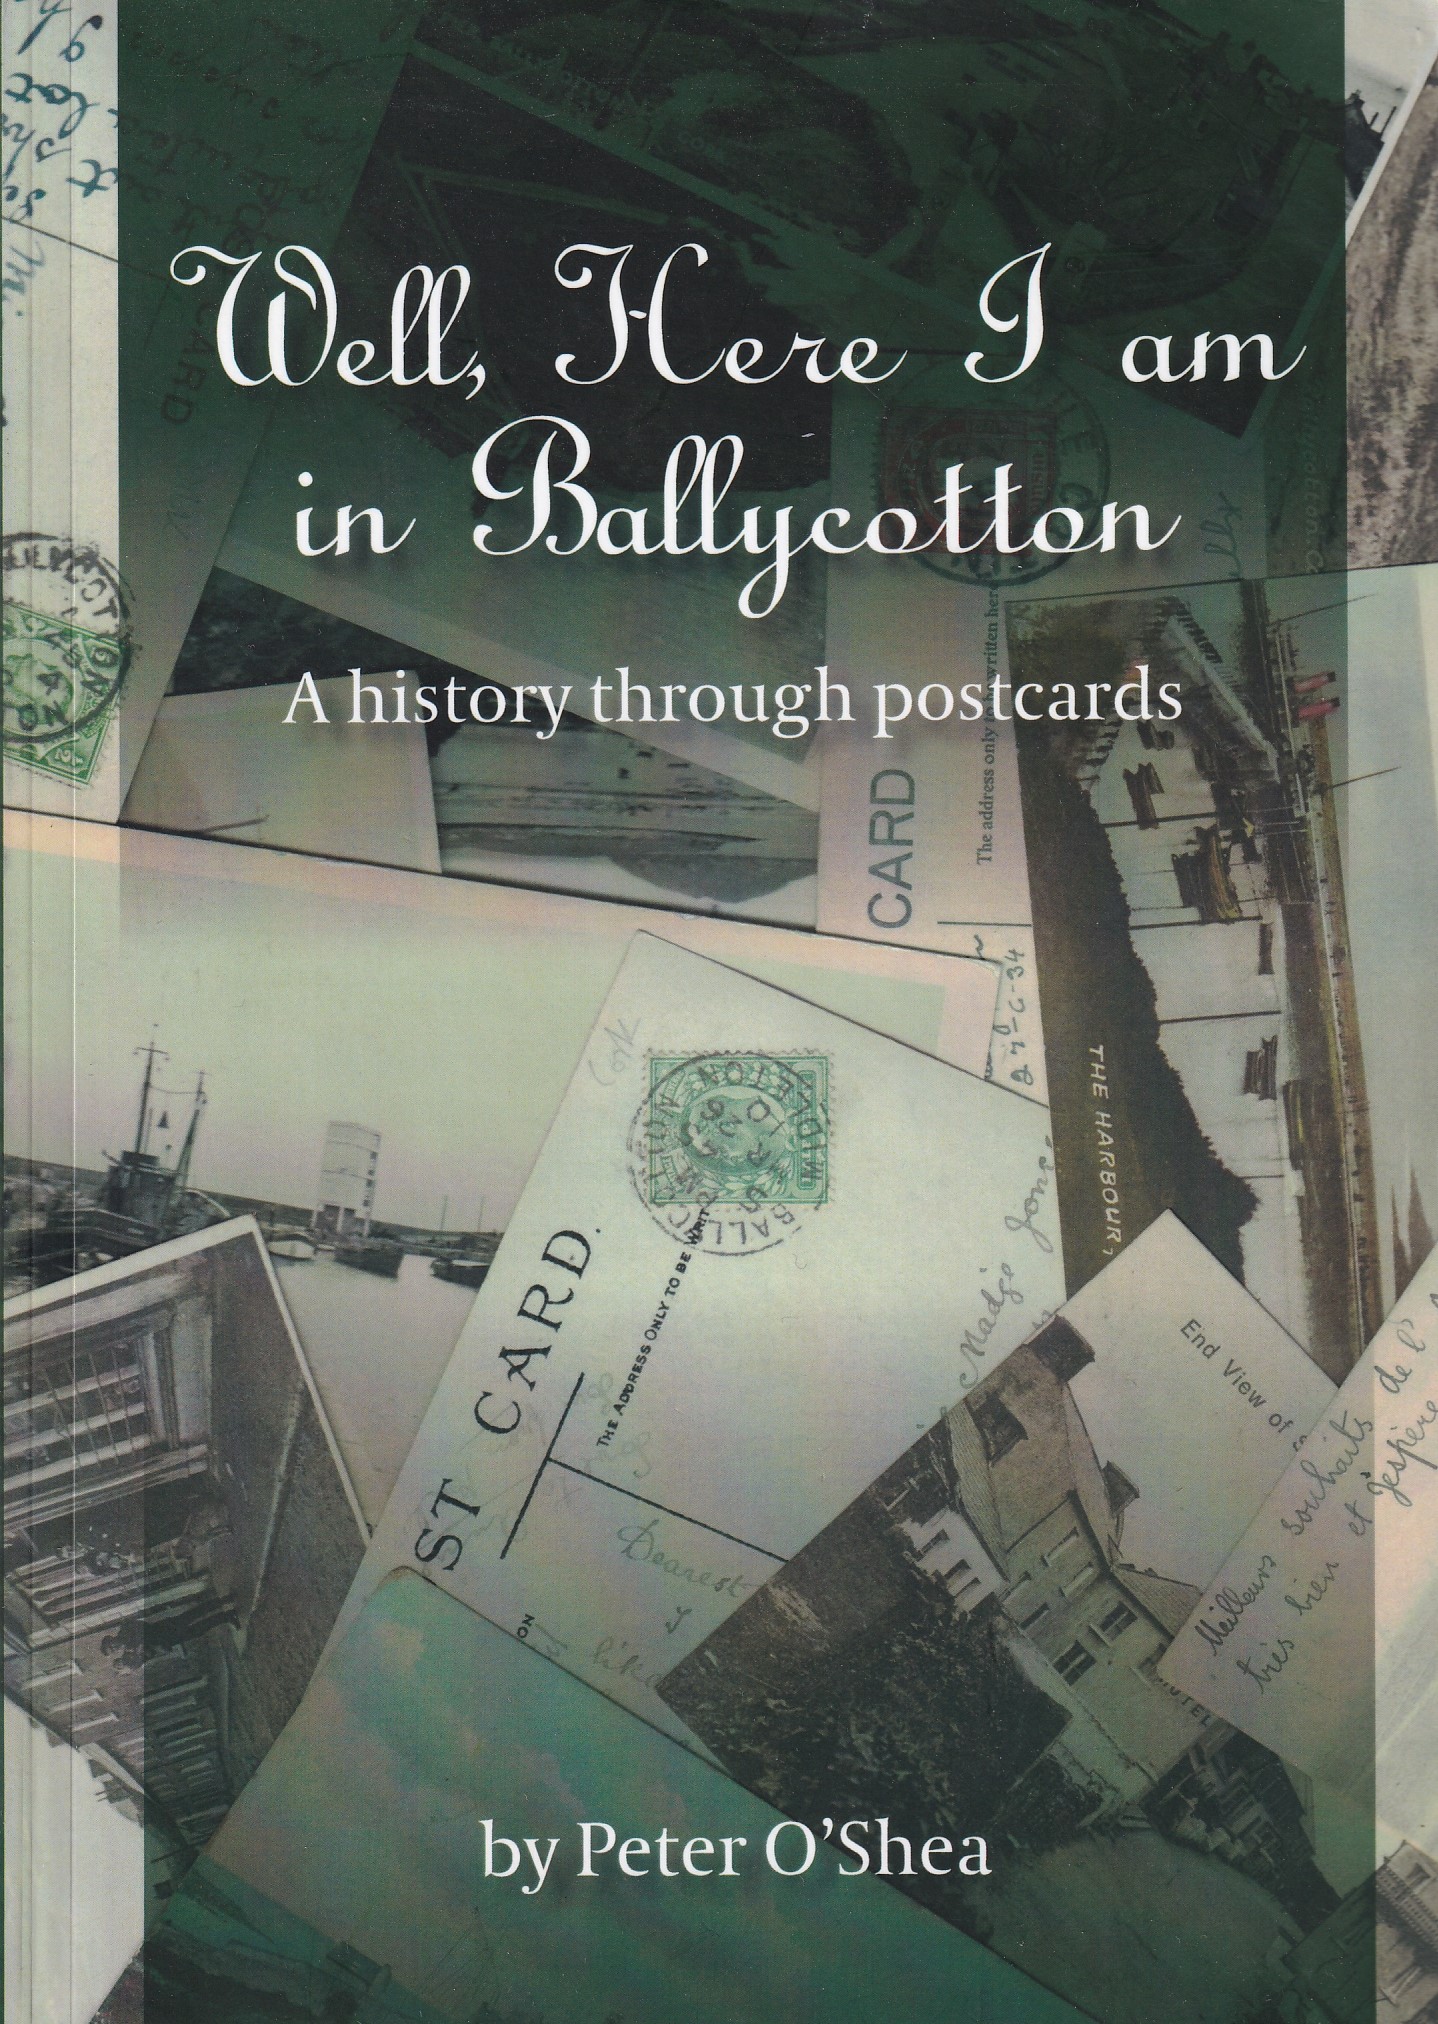 Well, here I am in Ballycotton: a history through postcards [Signed] | Peter O'Shea | Charlie Byrne's